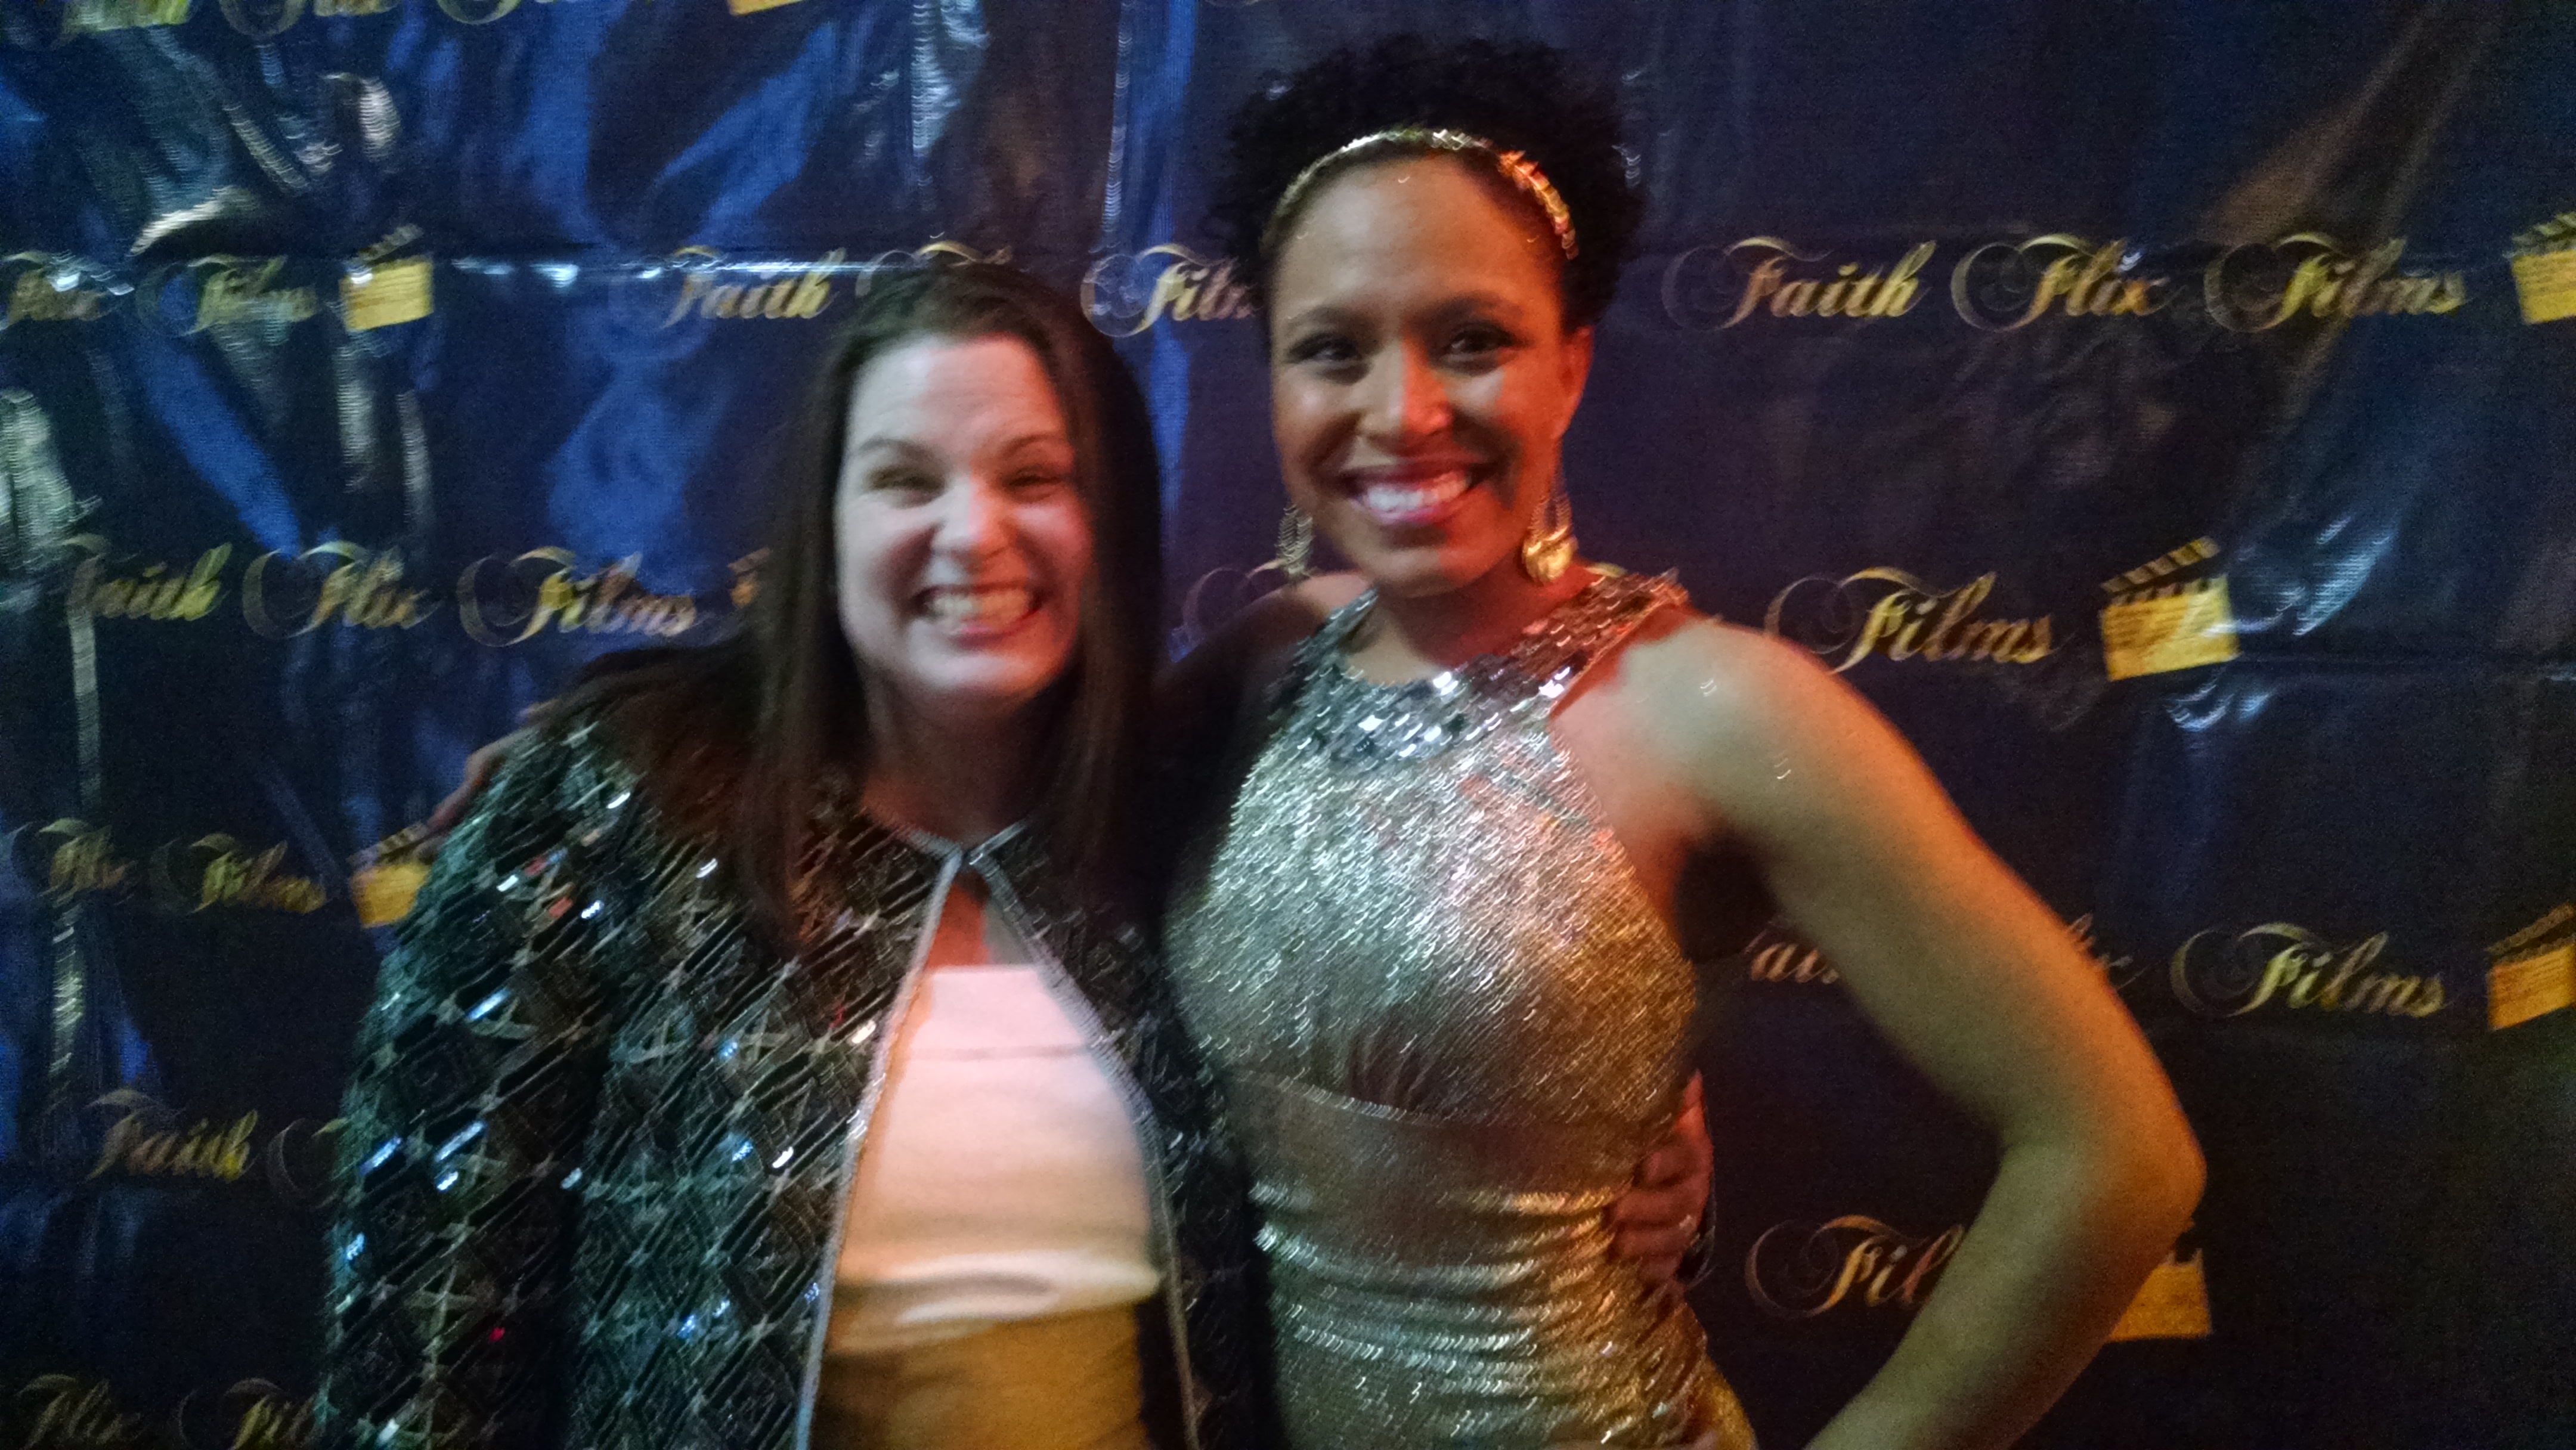 Loran Bolding left and Apolonia Davalos right at the Providence Red Carpet Premier.